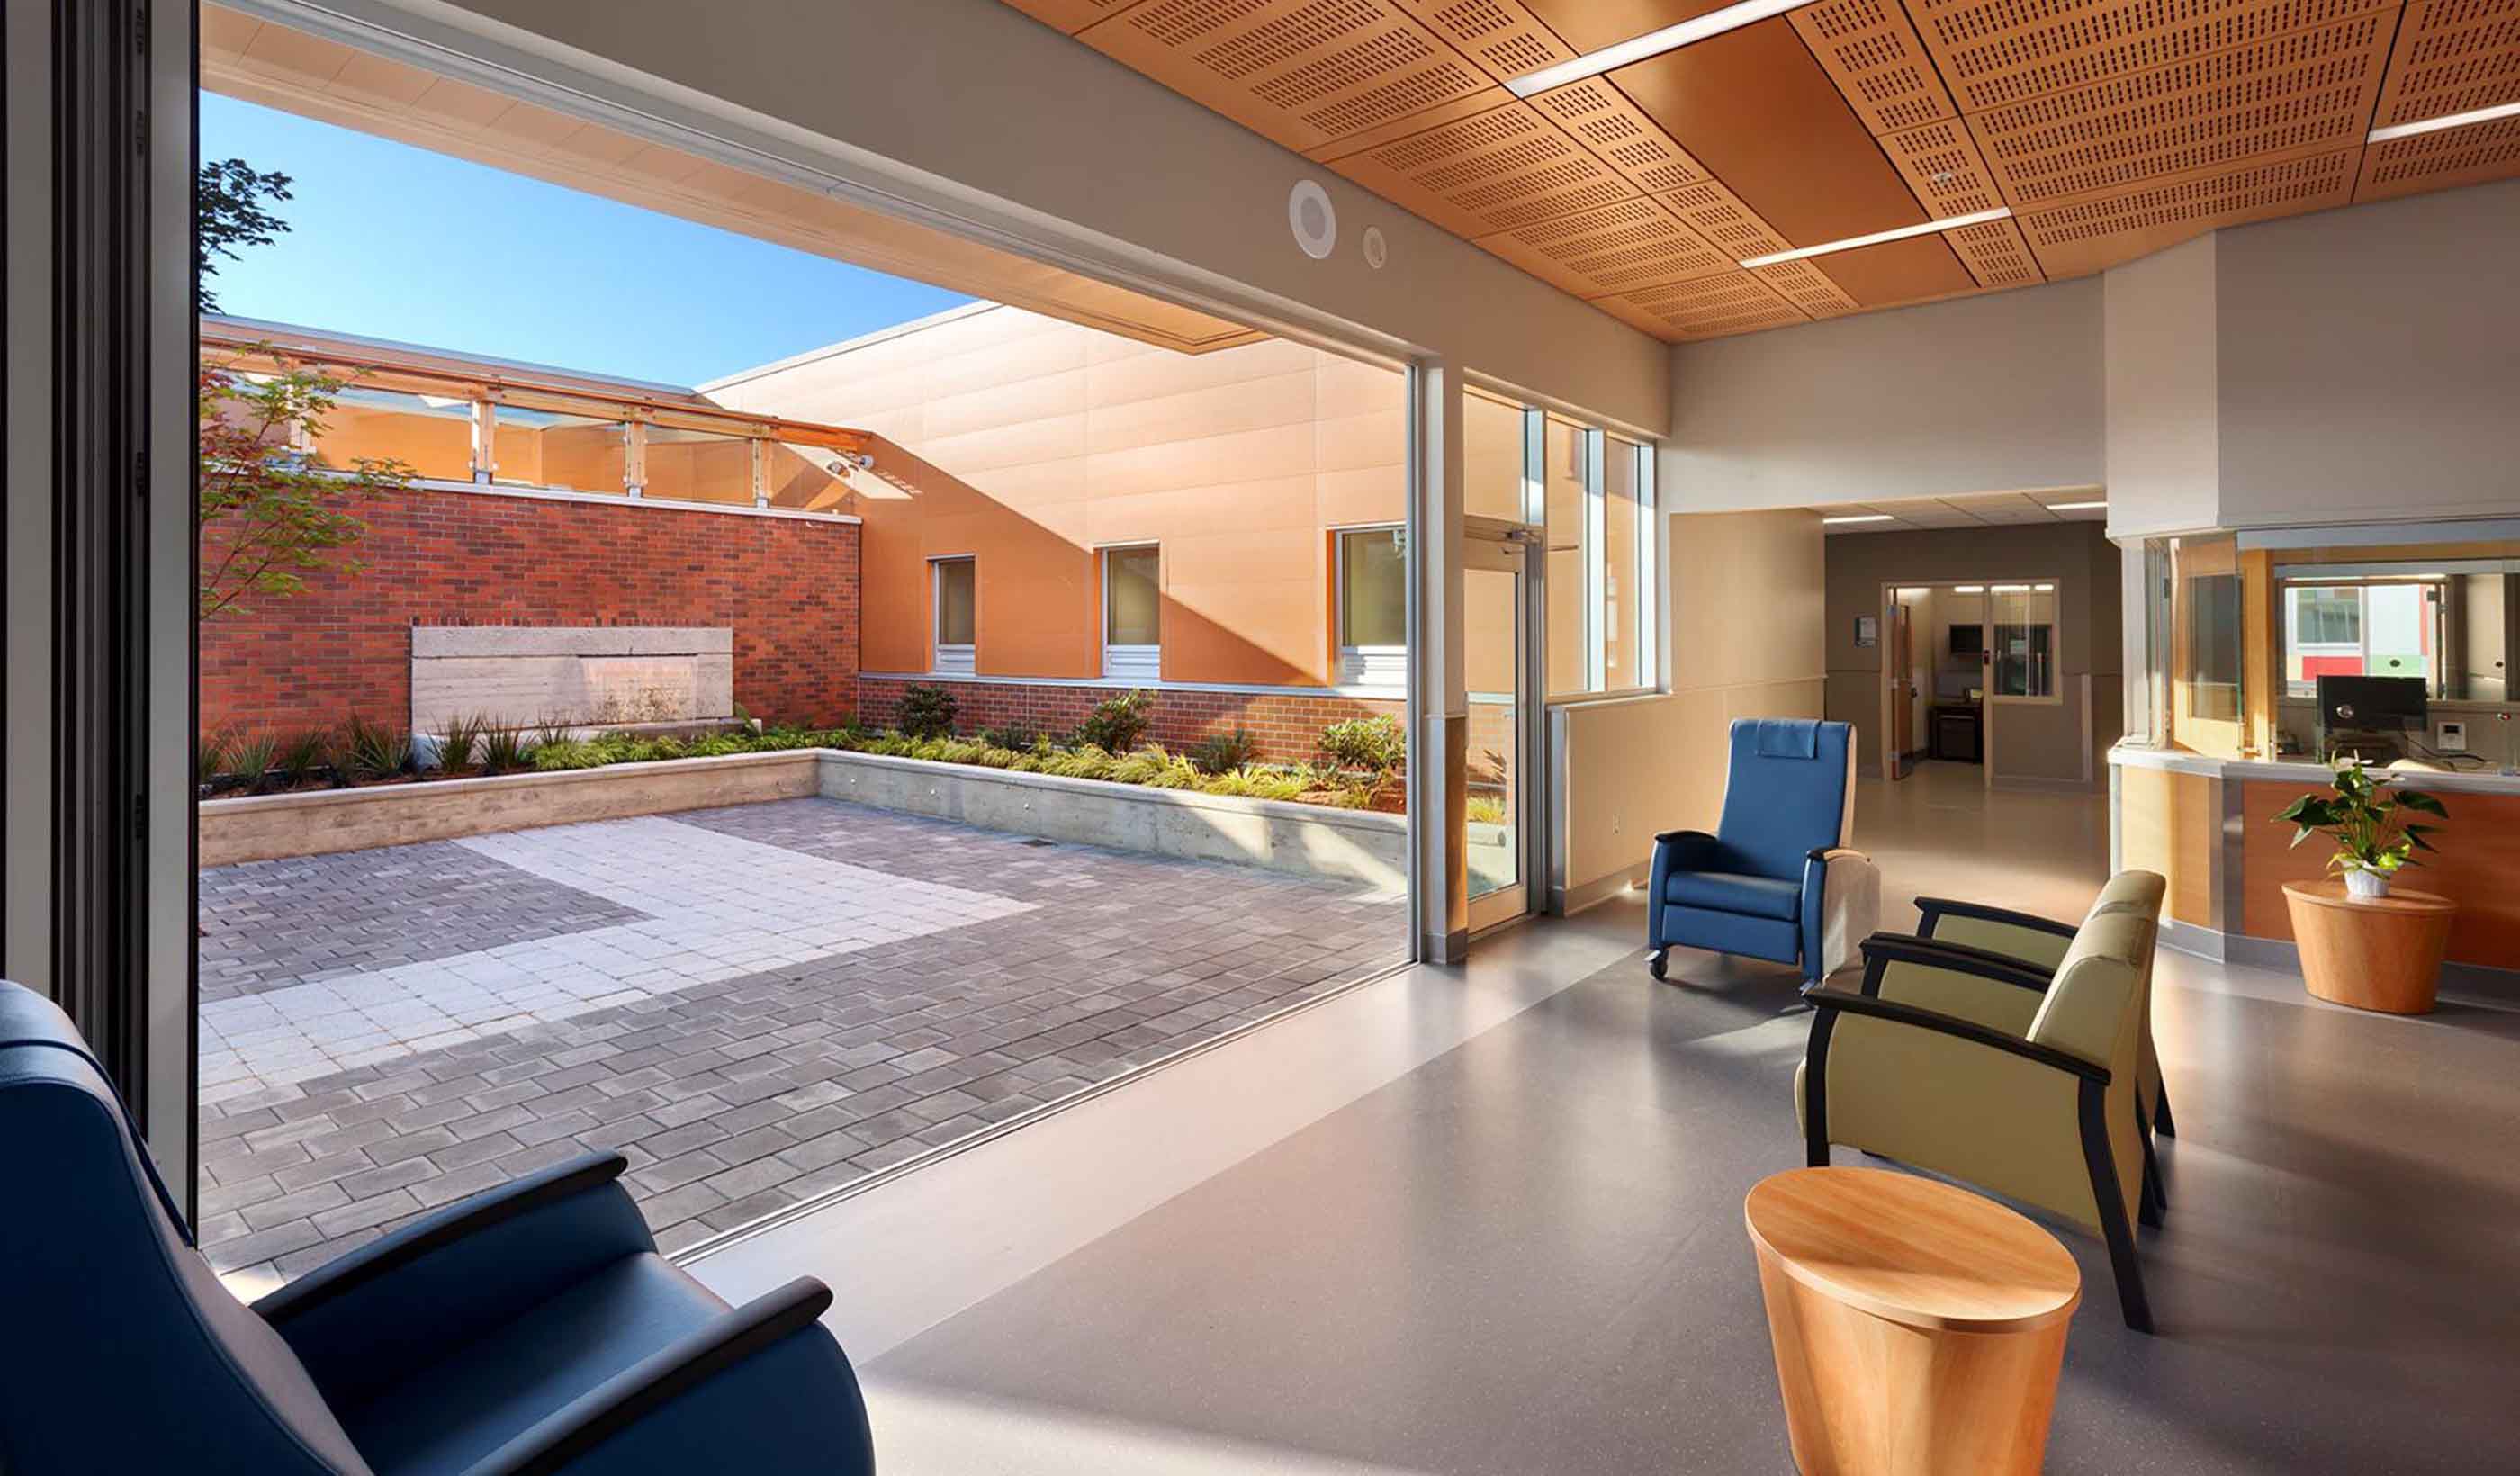 How design can support mental health through crisis stabilization centers